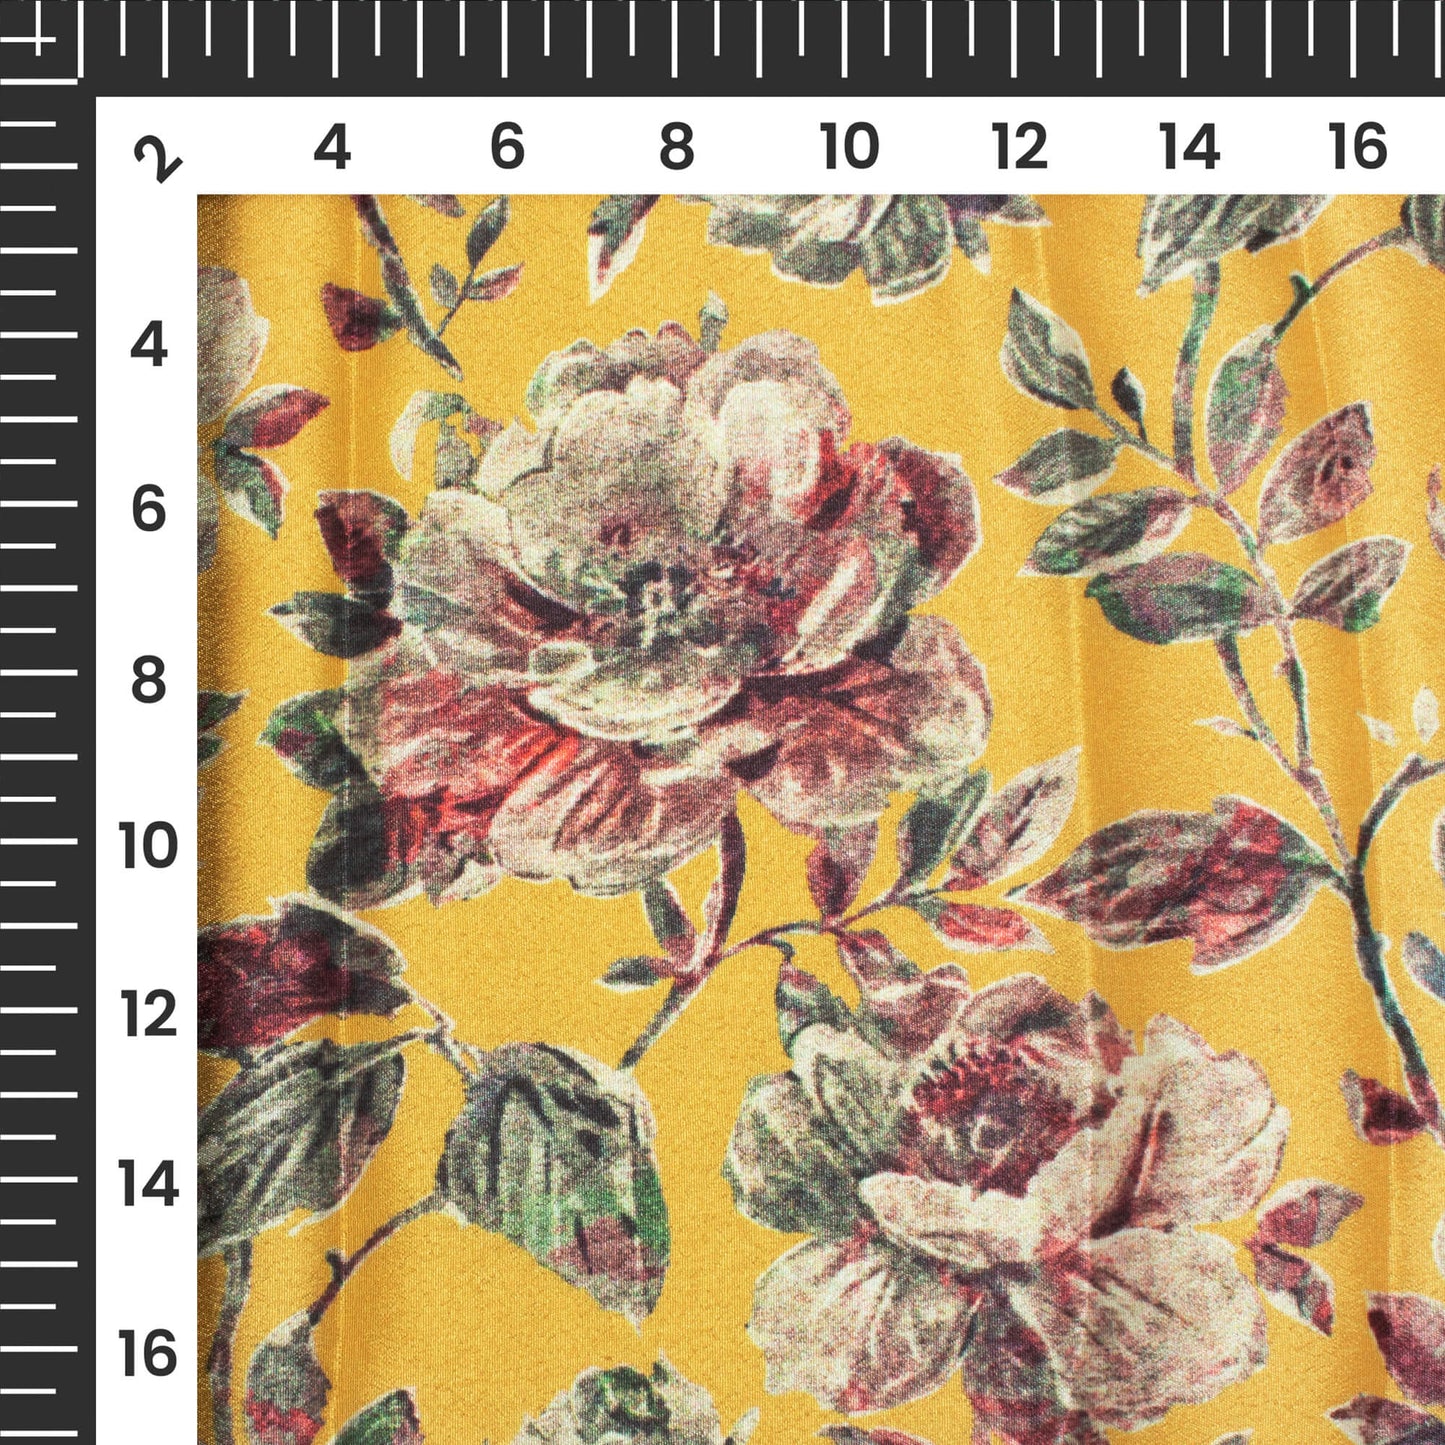 Canary Yellow Floral Digital Print Crepe Silk Fabric